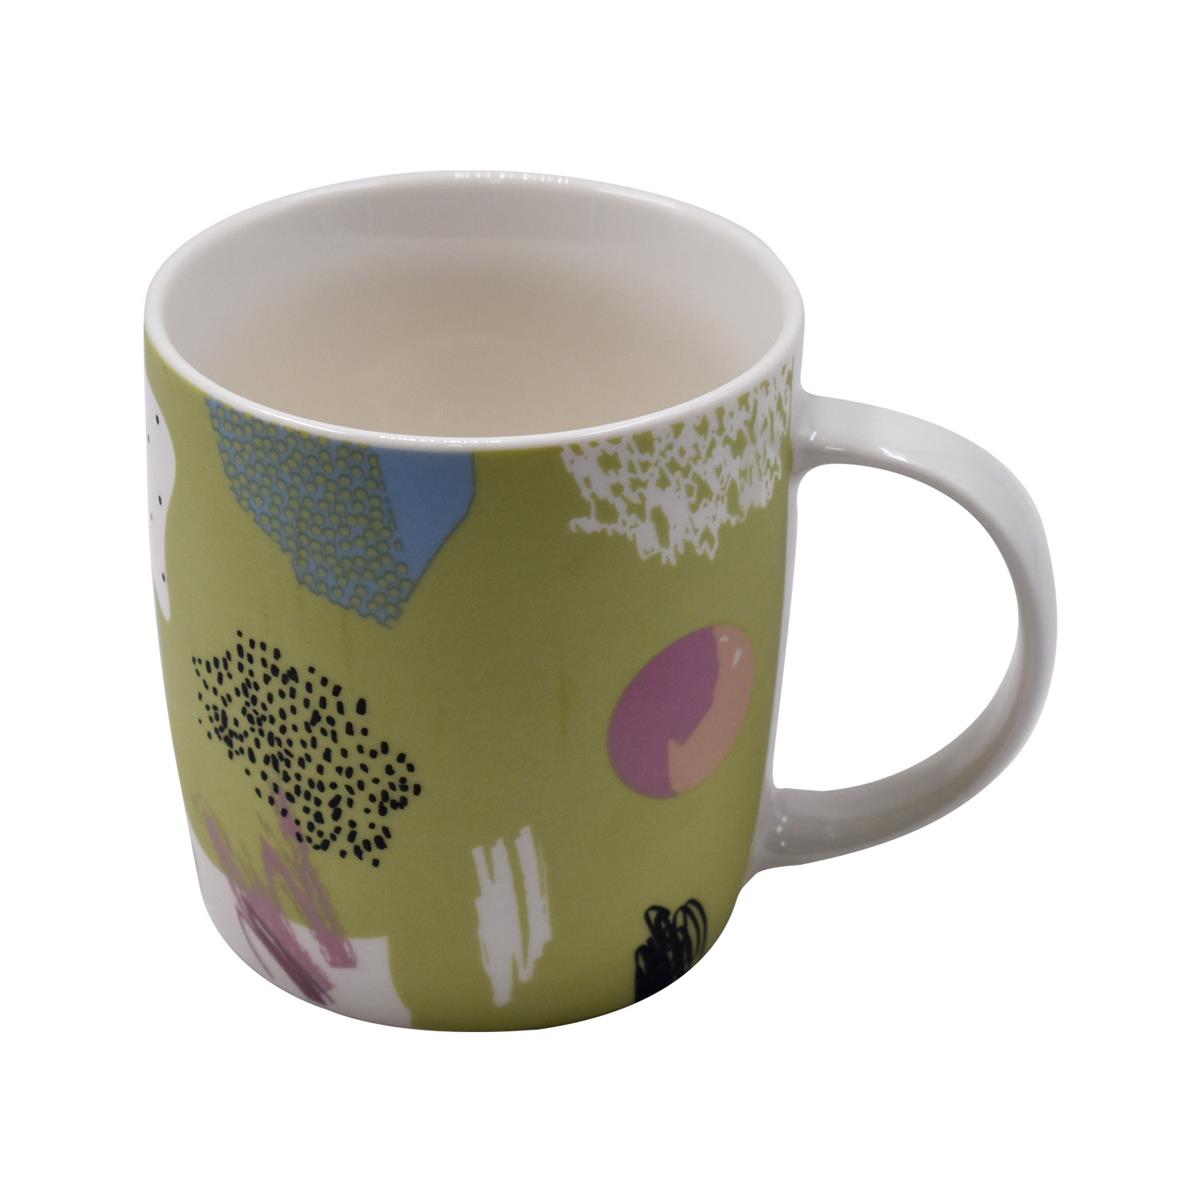 Kookee Ceramic Coffee or Tea Mug with handle for Office, Home or Gifting - 325ml (R4901-D)